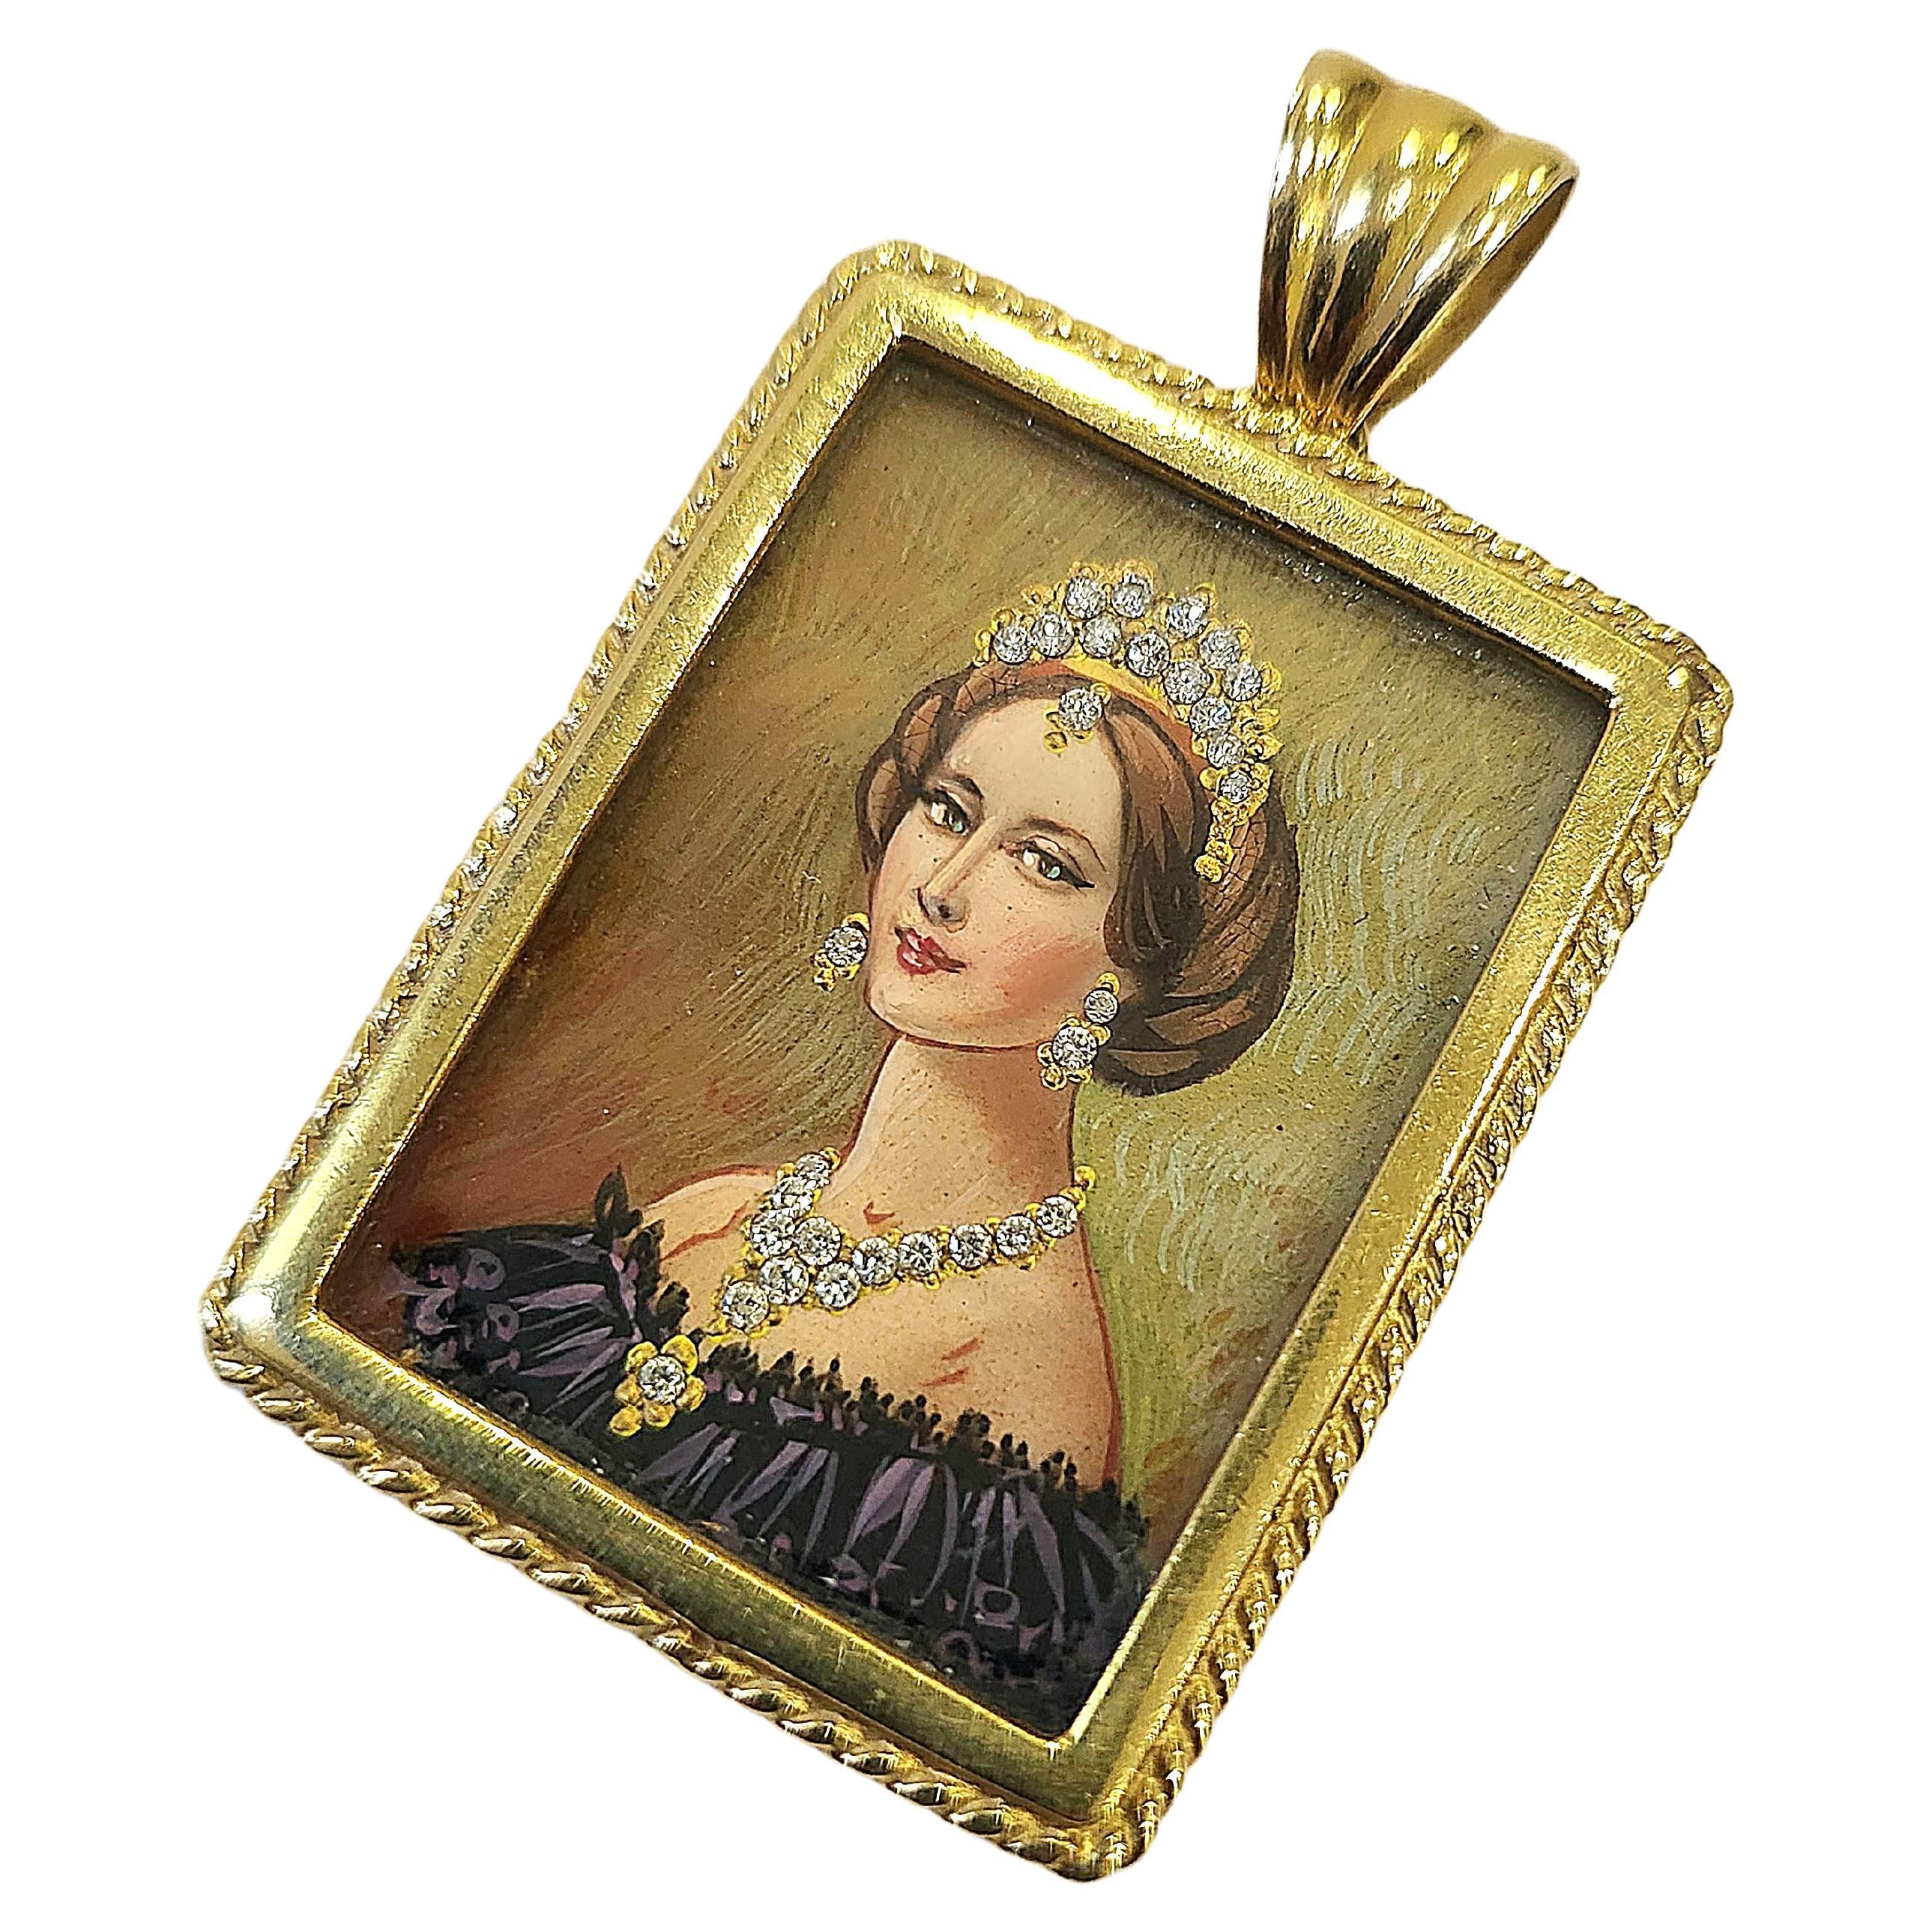 Antique unuswal gold pendant in woman portrait decortated with real diamond necklace and crown with an estemate weight 0.50 carats hall marked 750 gold standard and italy hall mark and makers mark 